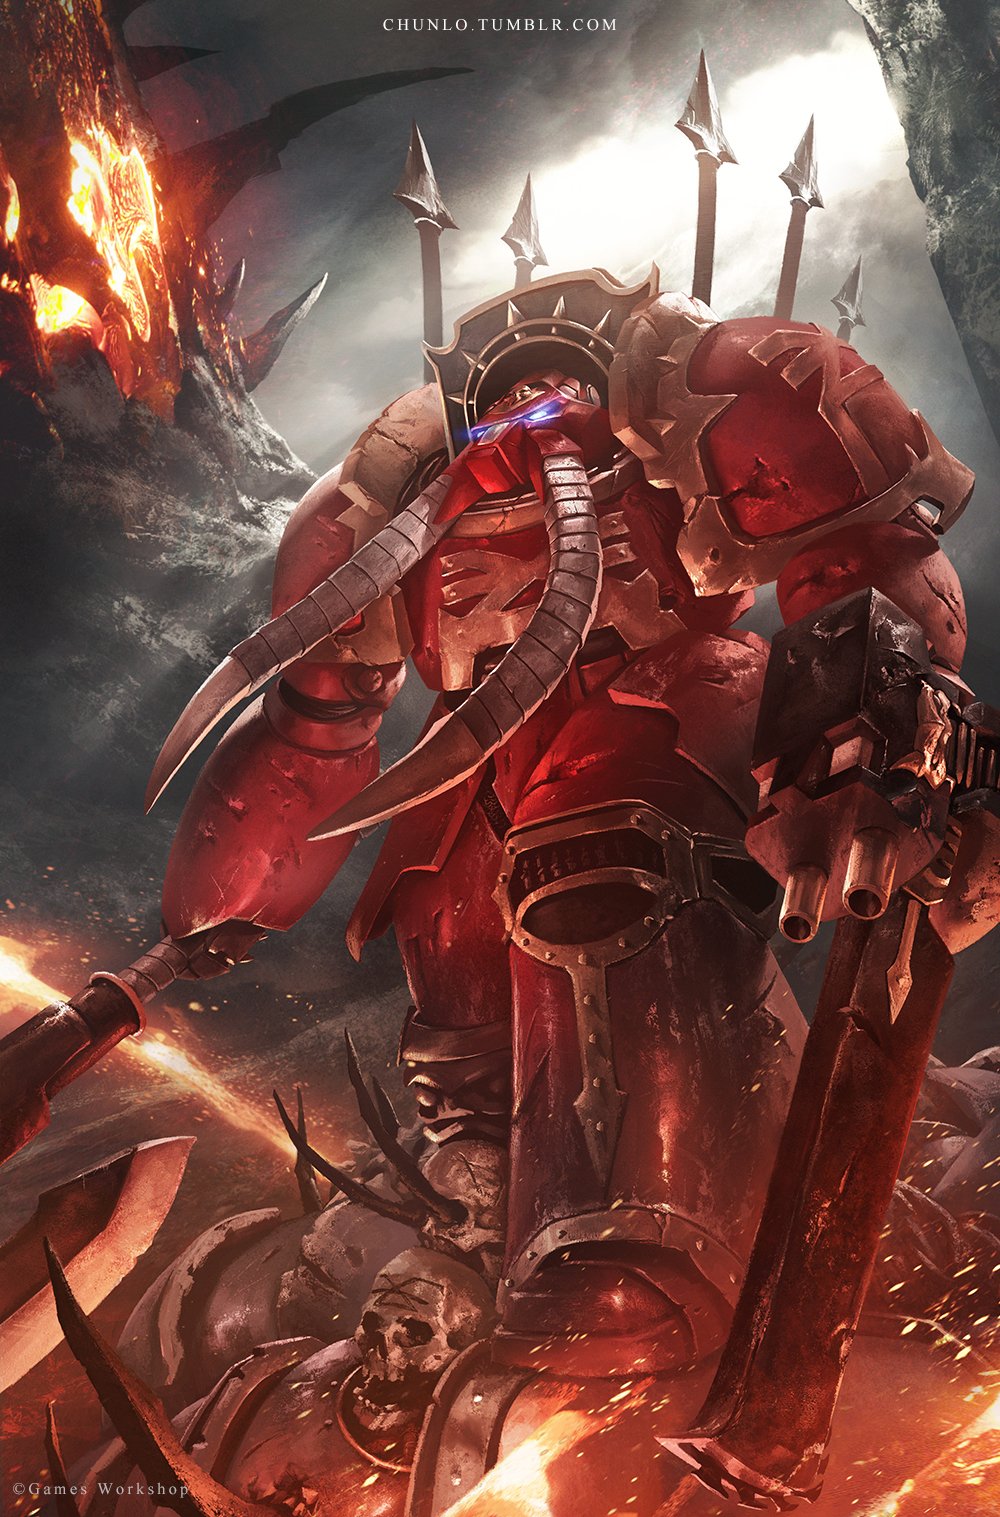 1boy adeptus_astartes armor ashes axe bayonet blue_eyes bullet chainsaw chaos_space_marine chun_lo cloud cloudy_sky death fire full_armor glowing glowing_eyes gun helmet highres holding holding_axe holding_gun holding_weapon male_focus power_armor red_armor shoulder_armor sign_of_khorne skull sky smoke solo spikes tumblr_username tusks warhammer_40k weapon